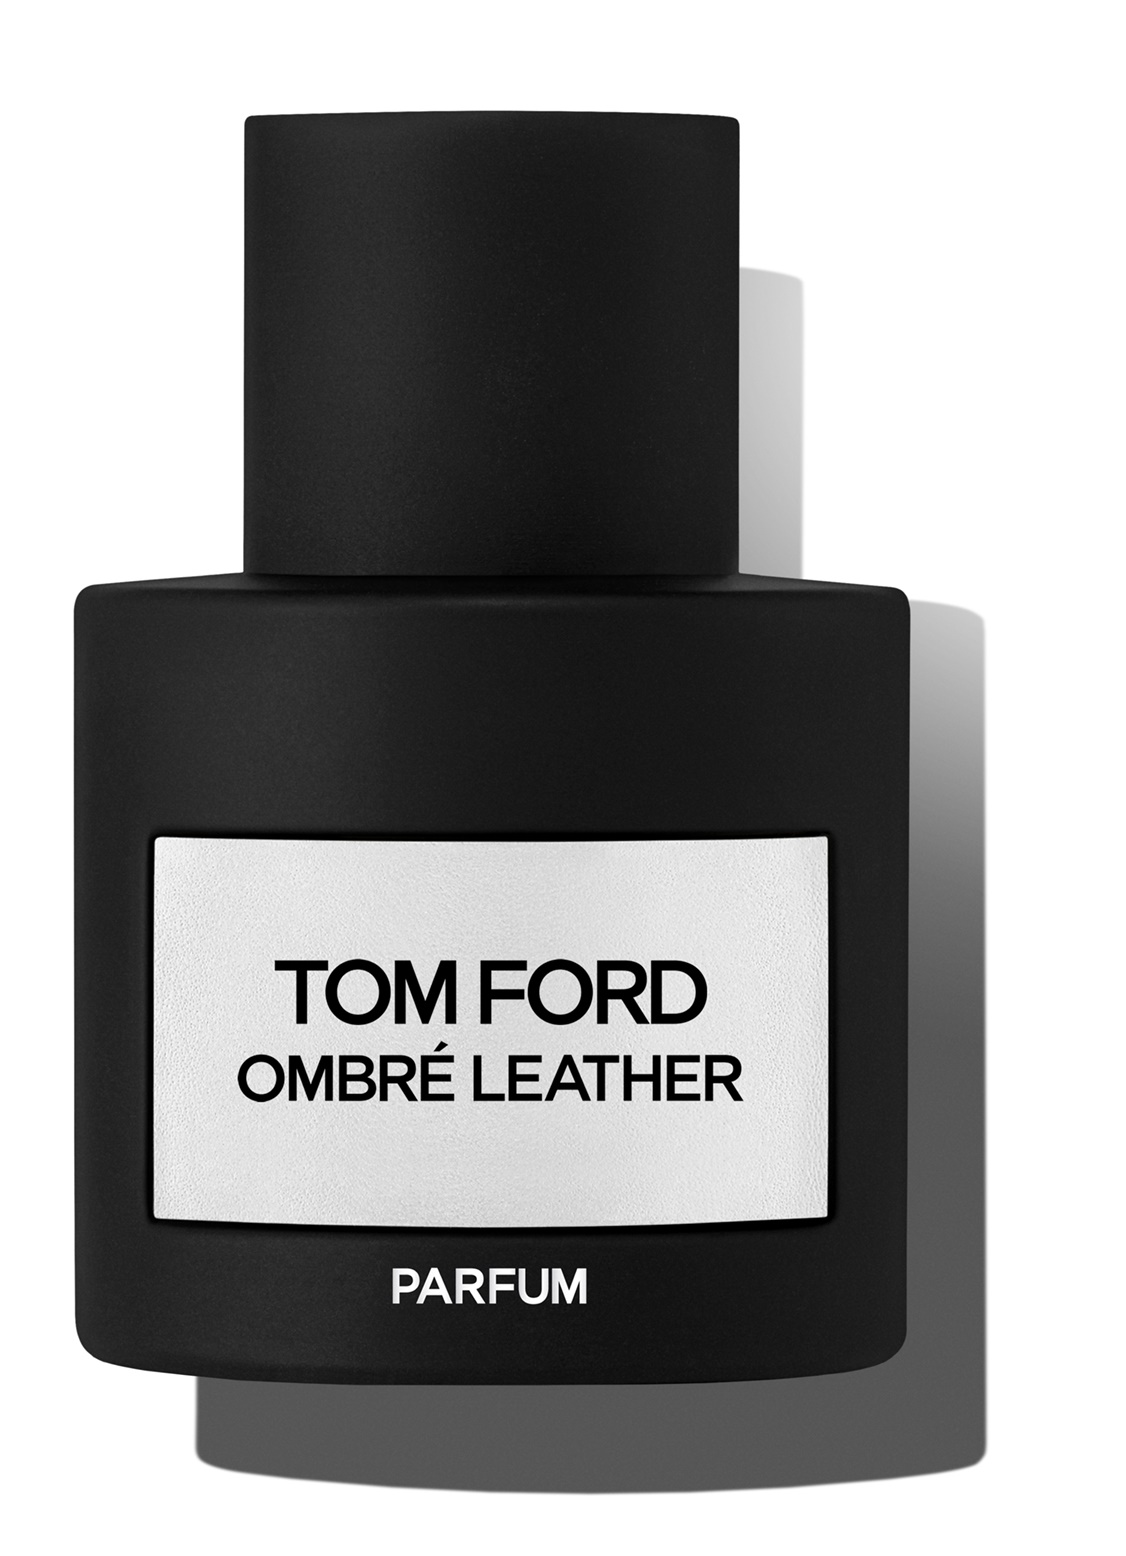 Tom Ford Beauty - Ombre Leather